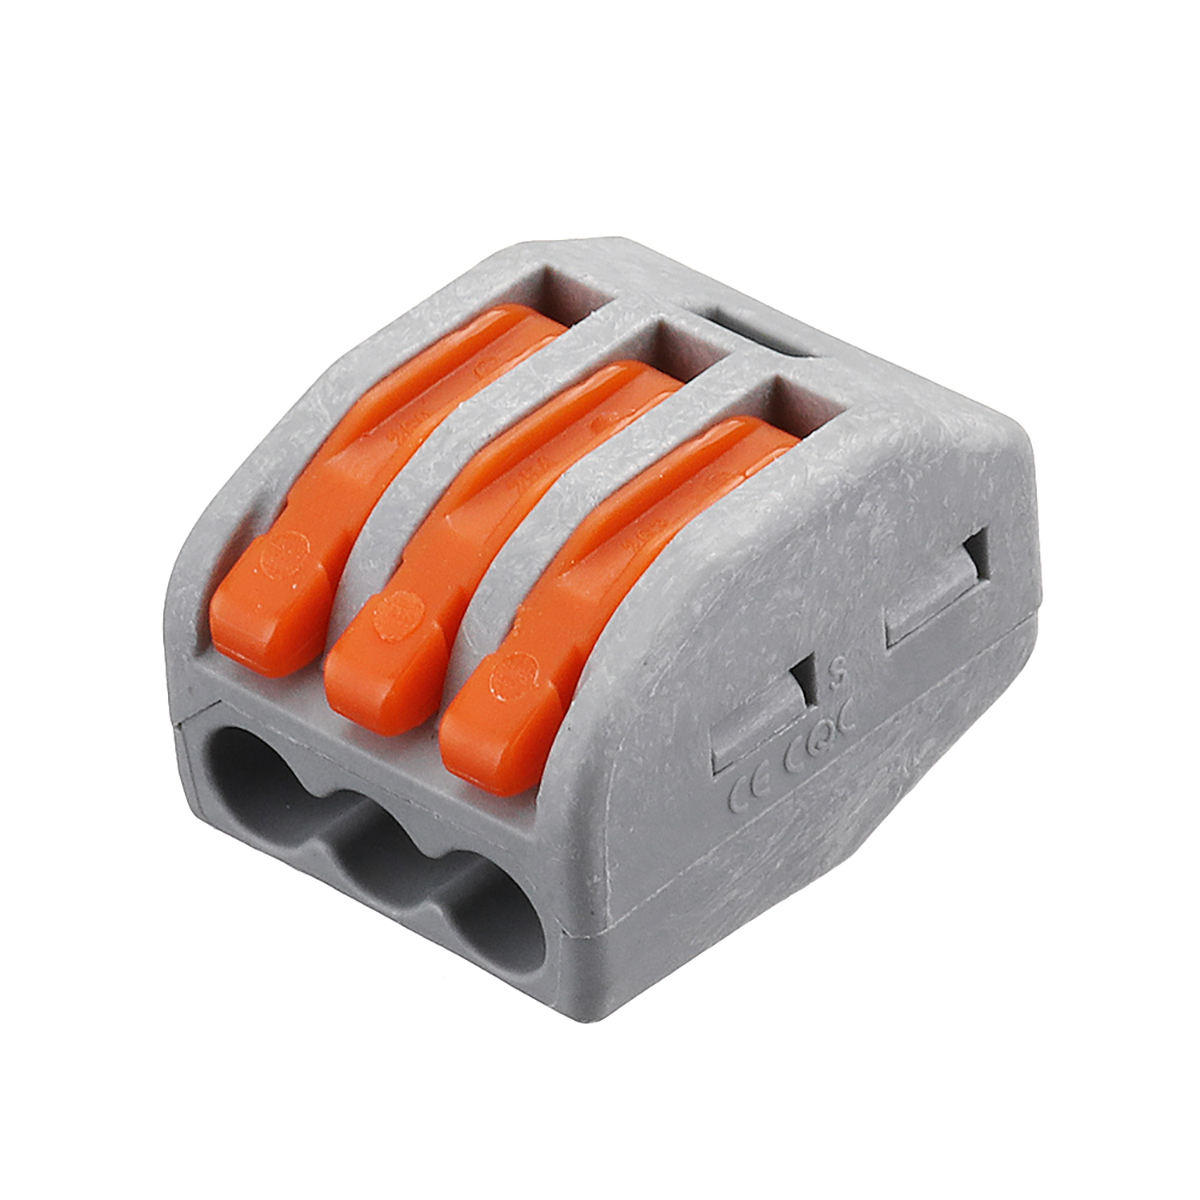 Excellwayreg-30Pcs-235-Holes-Spring-Conductor-Terminal-Block-Electric-Cable-Wire-Connector-1389031-8